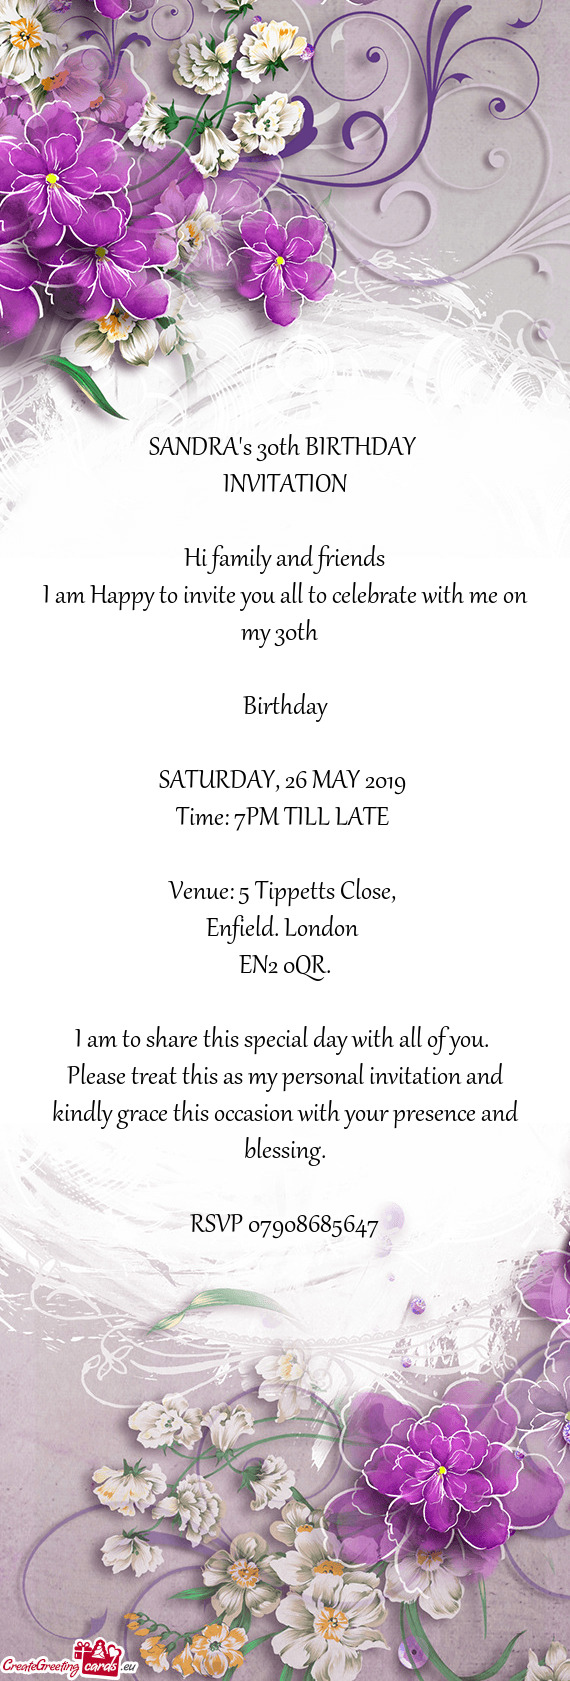 I am Happy to invite you all to celebrate with me on my 30th